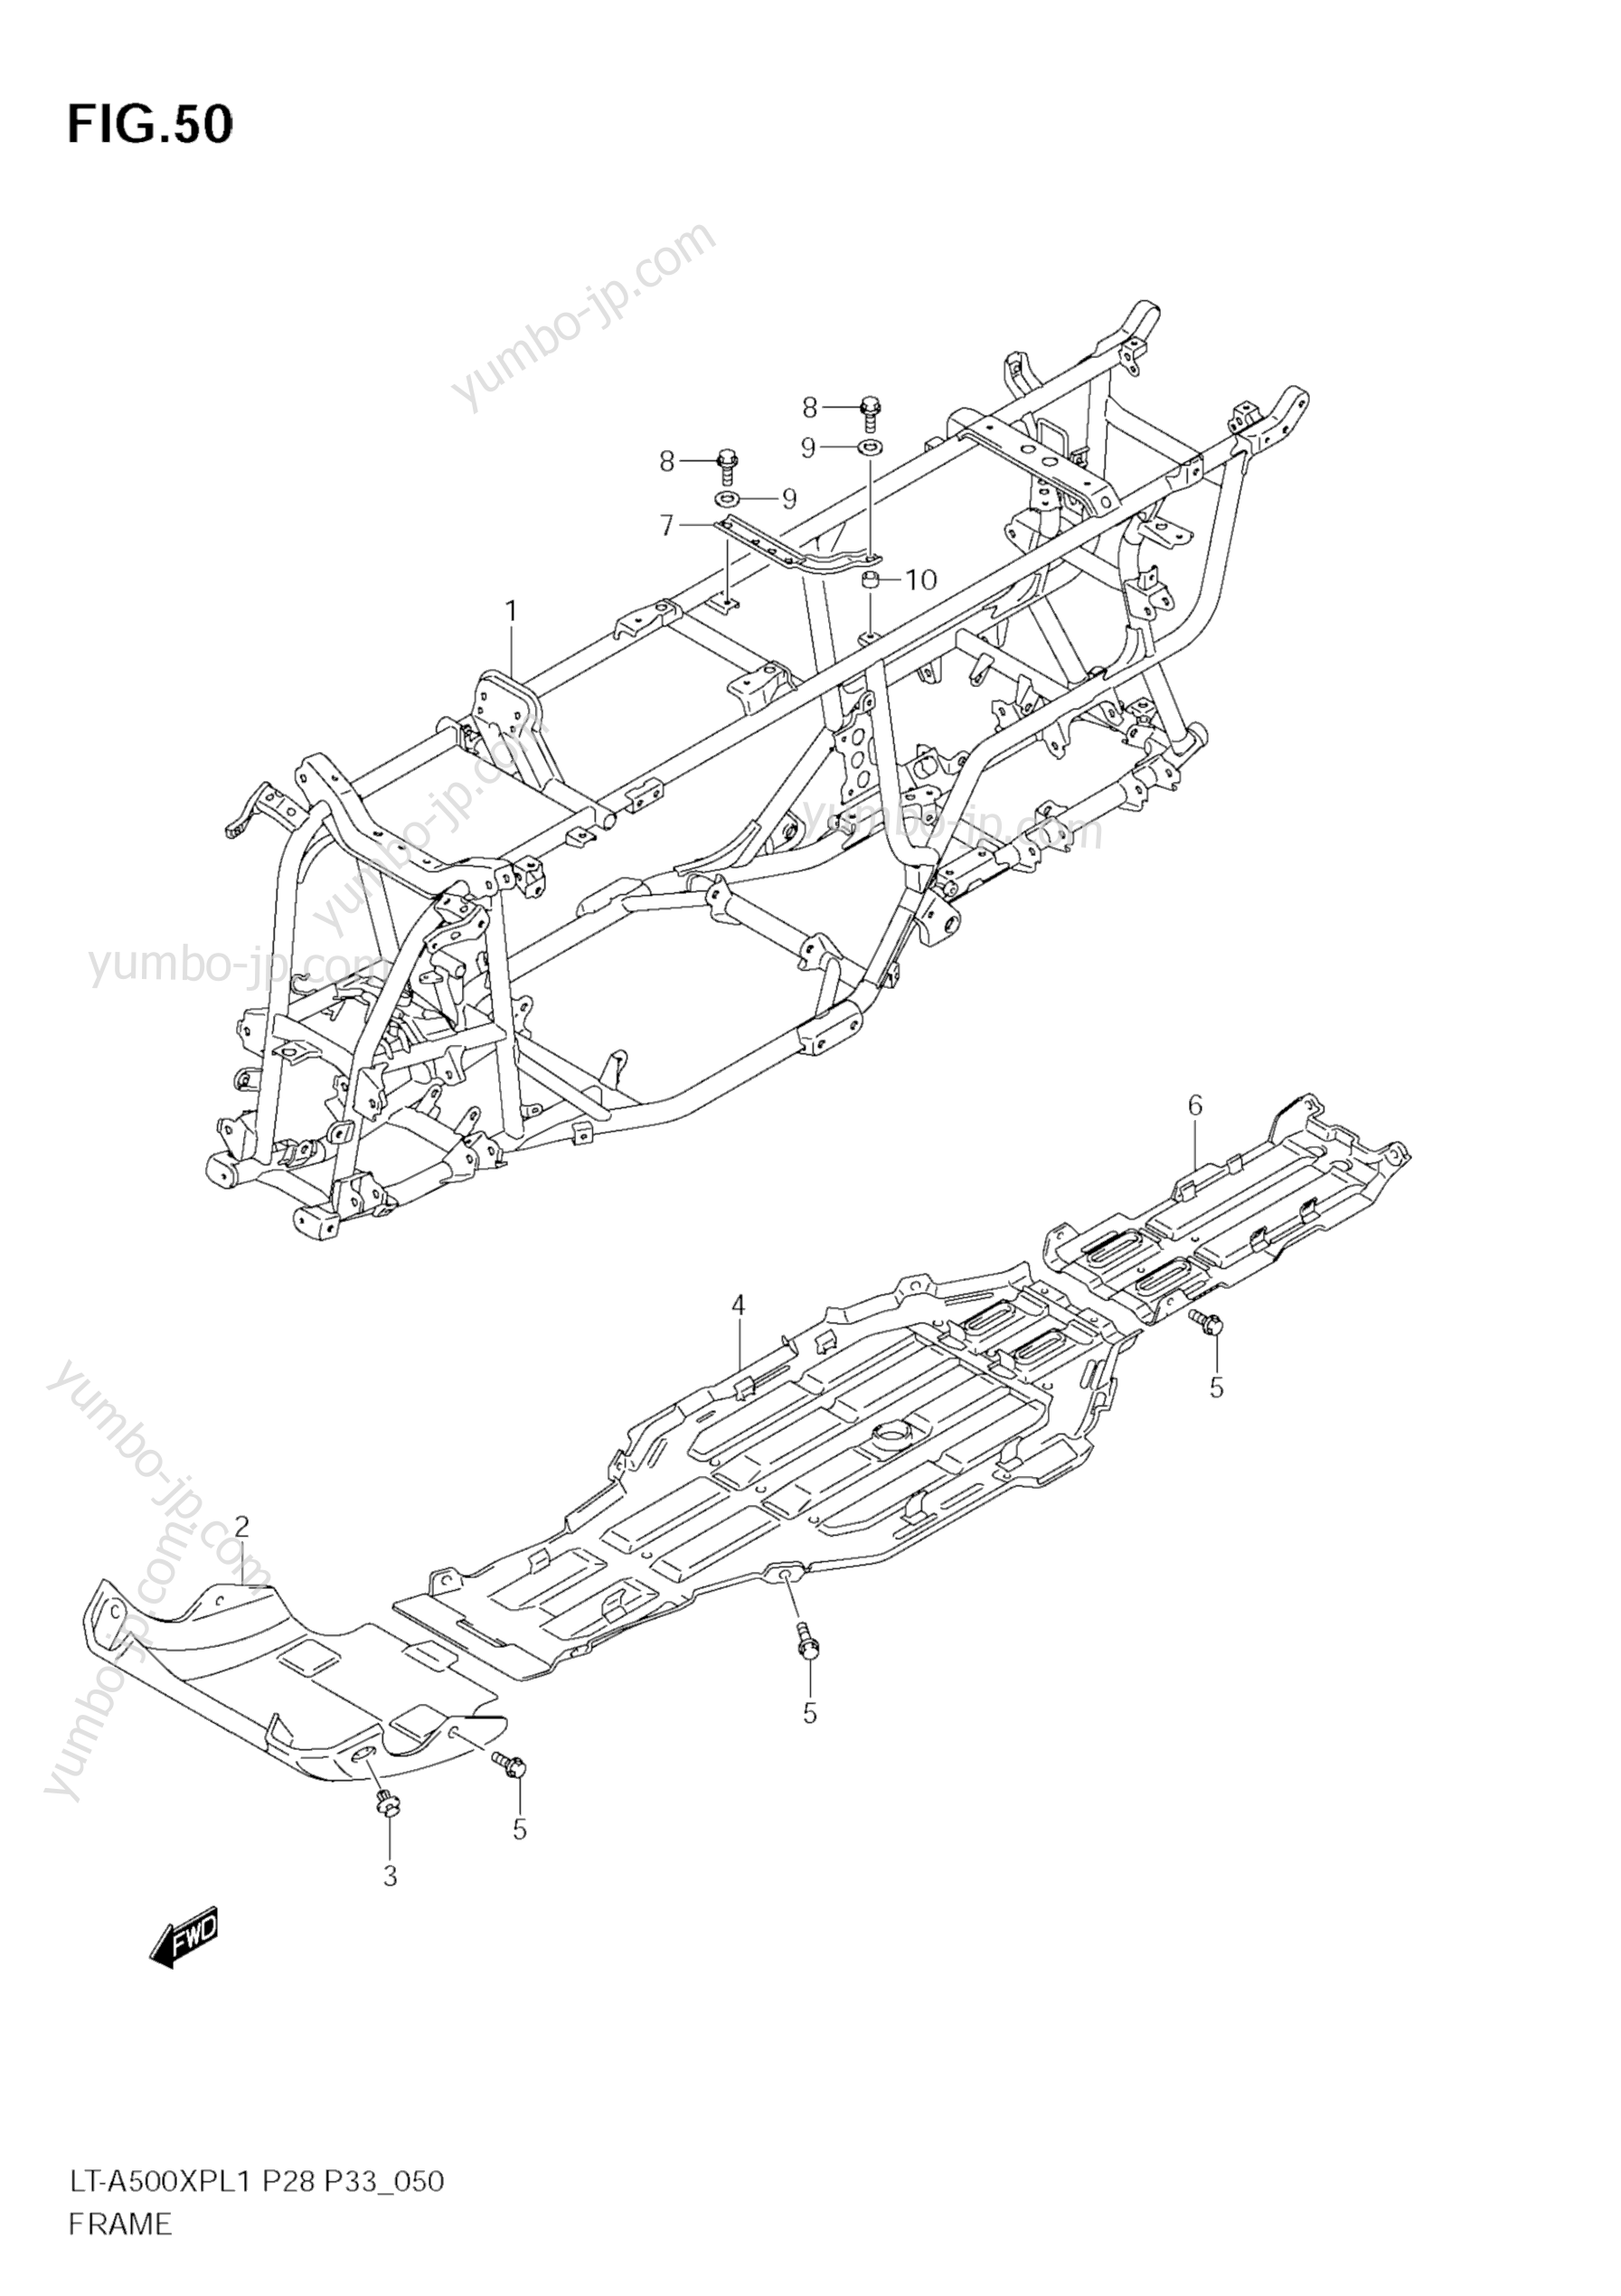 FRAME for ATVs SUZUKI KingQuad (LT-A500XP) 2011 year